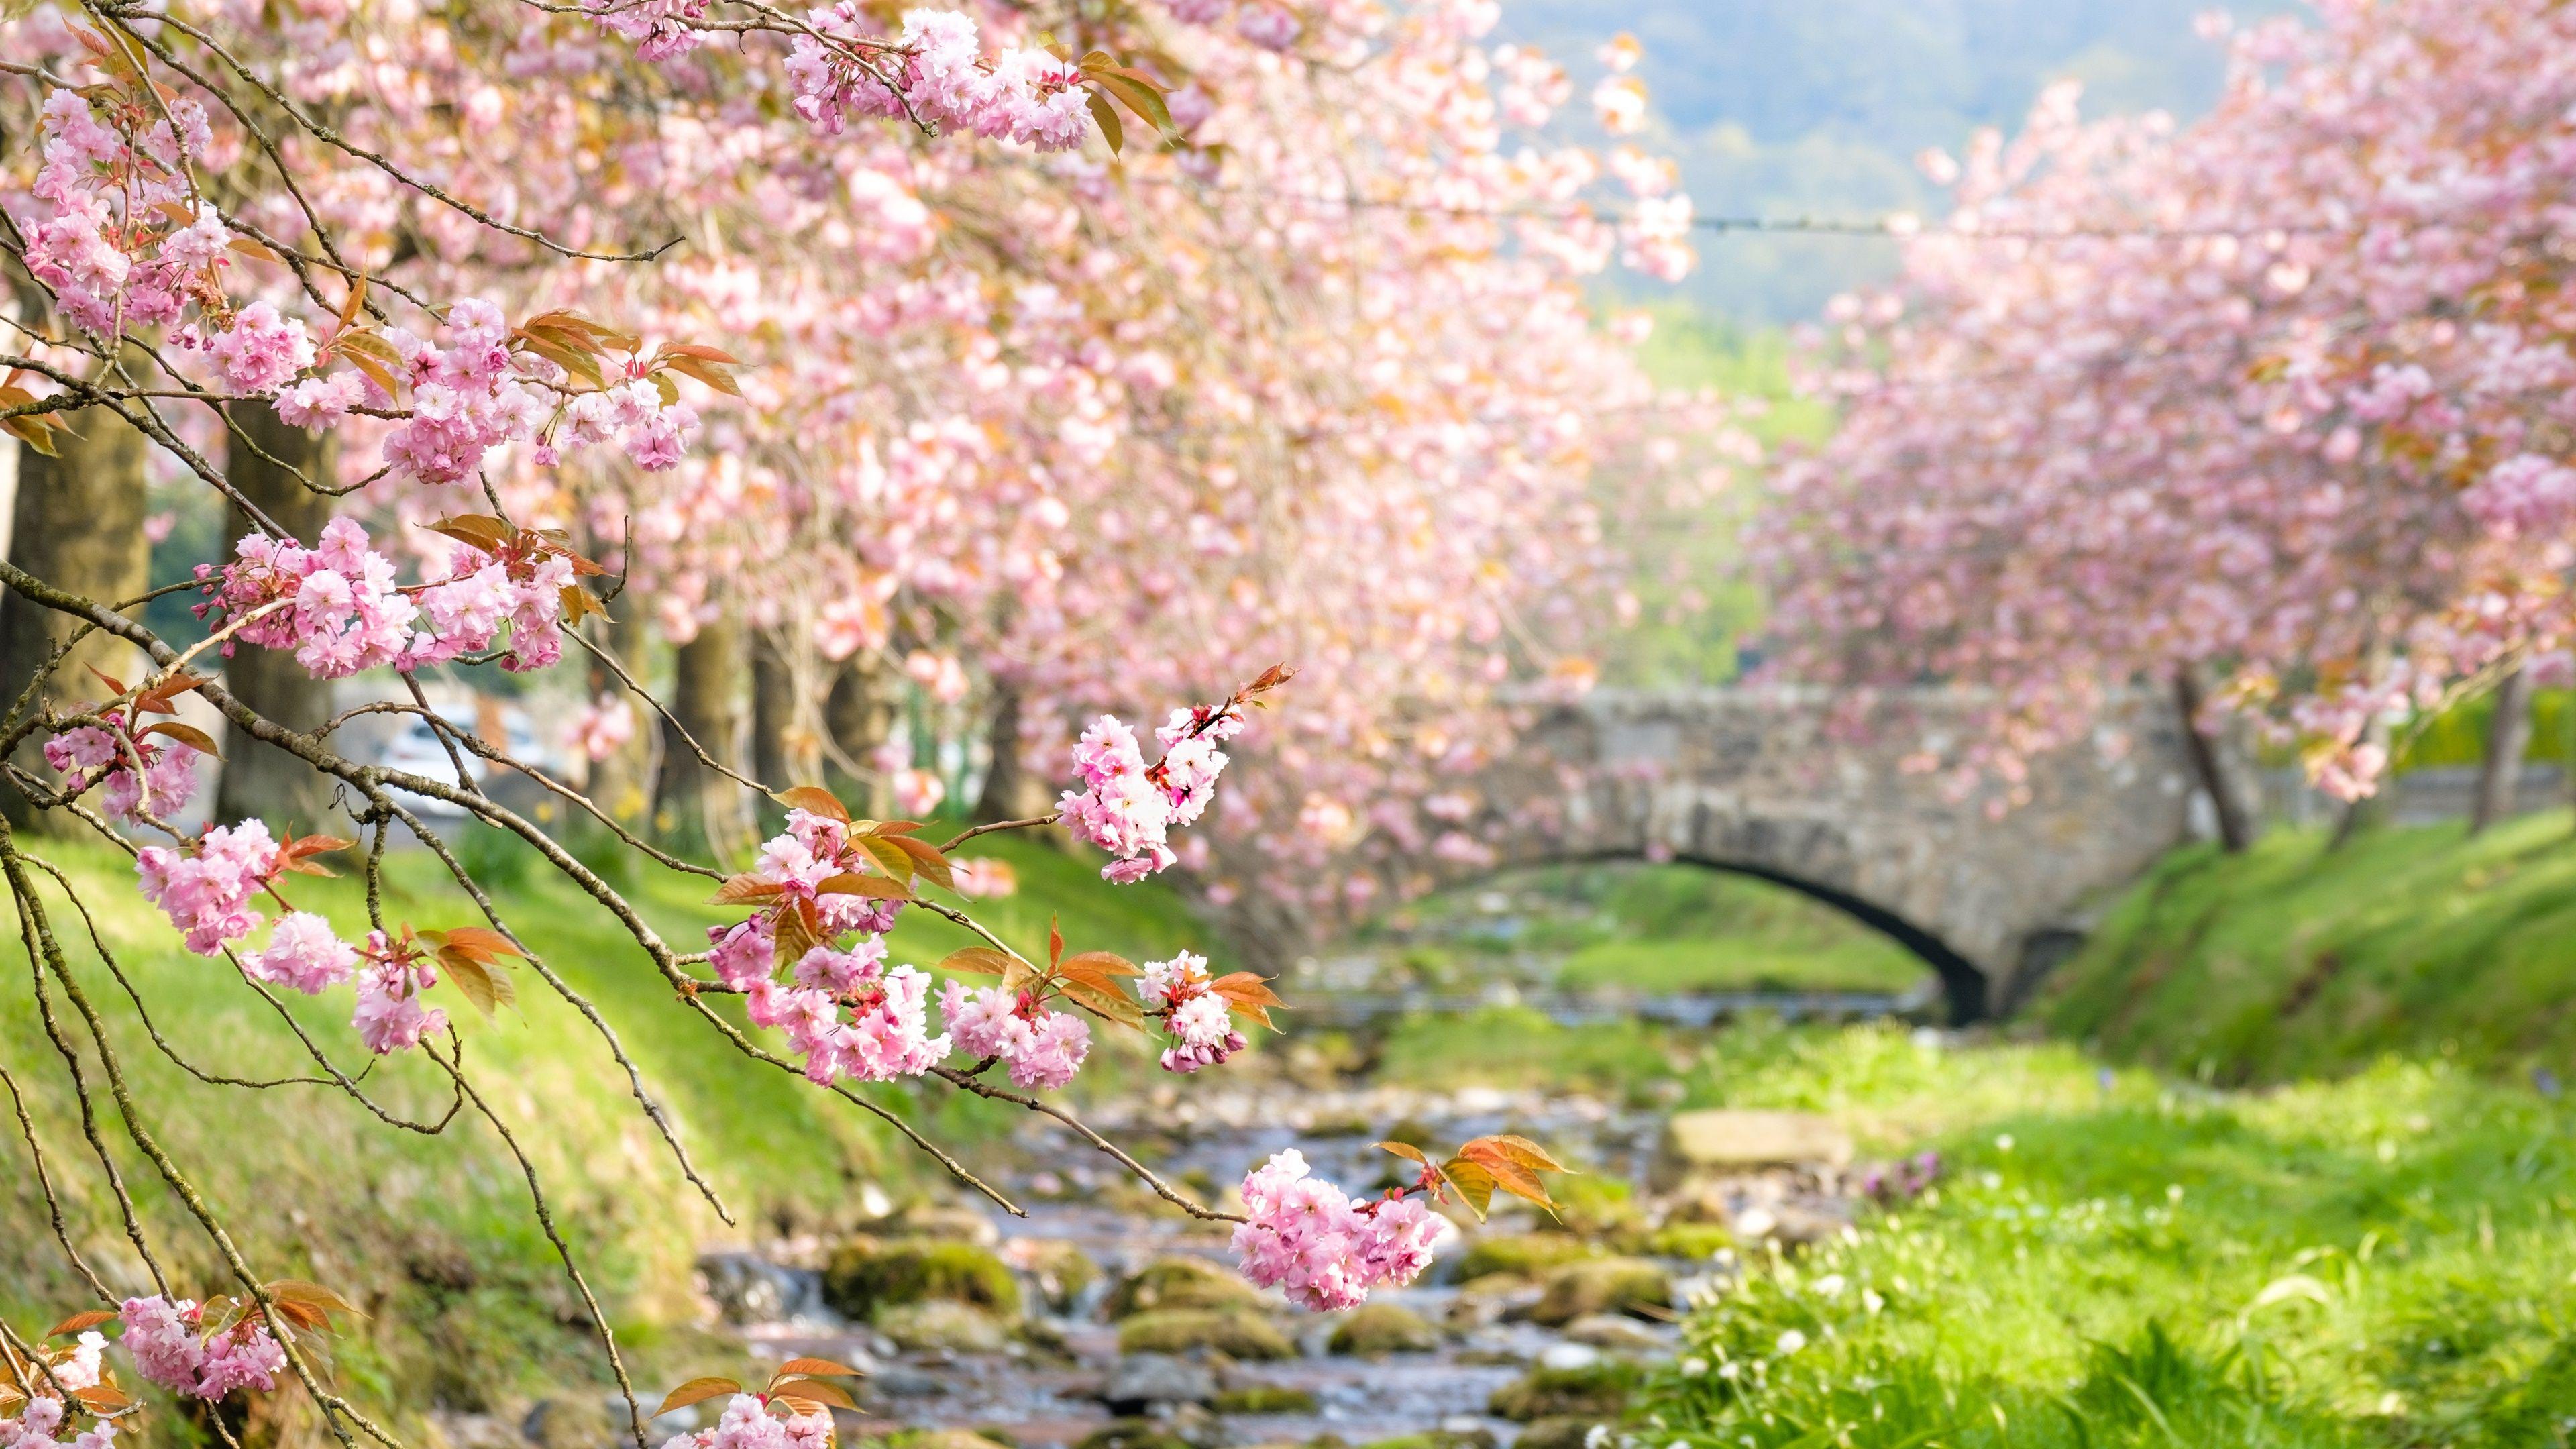 4K Cherry Blossom Wallpapers - Top Free 4K Cherry Blossom Backgrounds